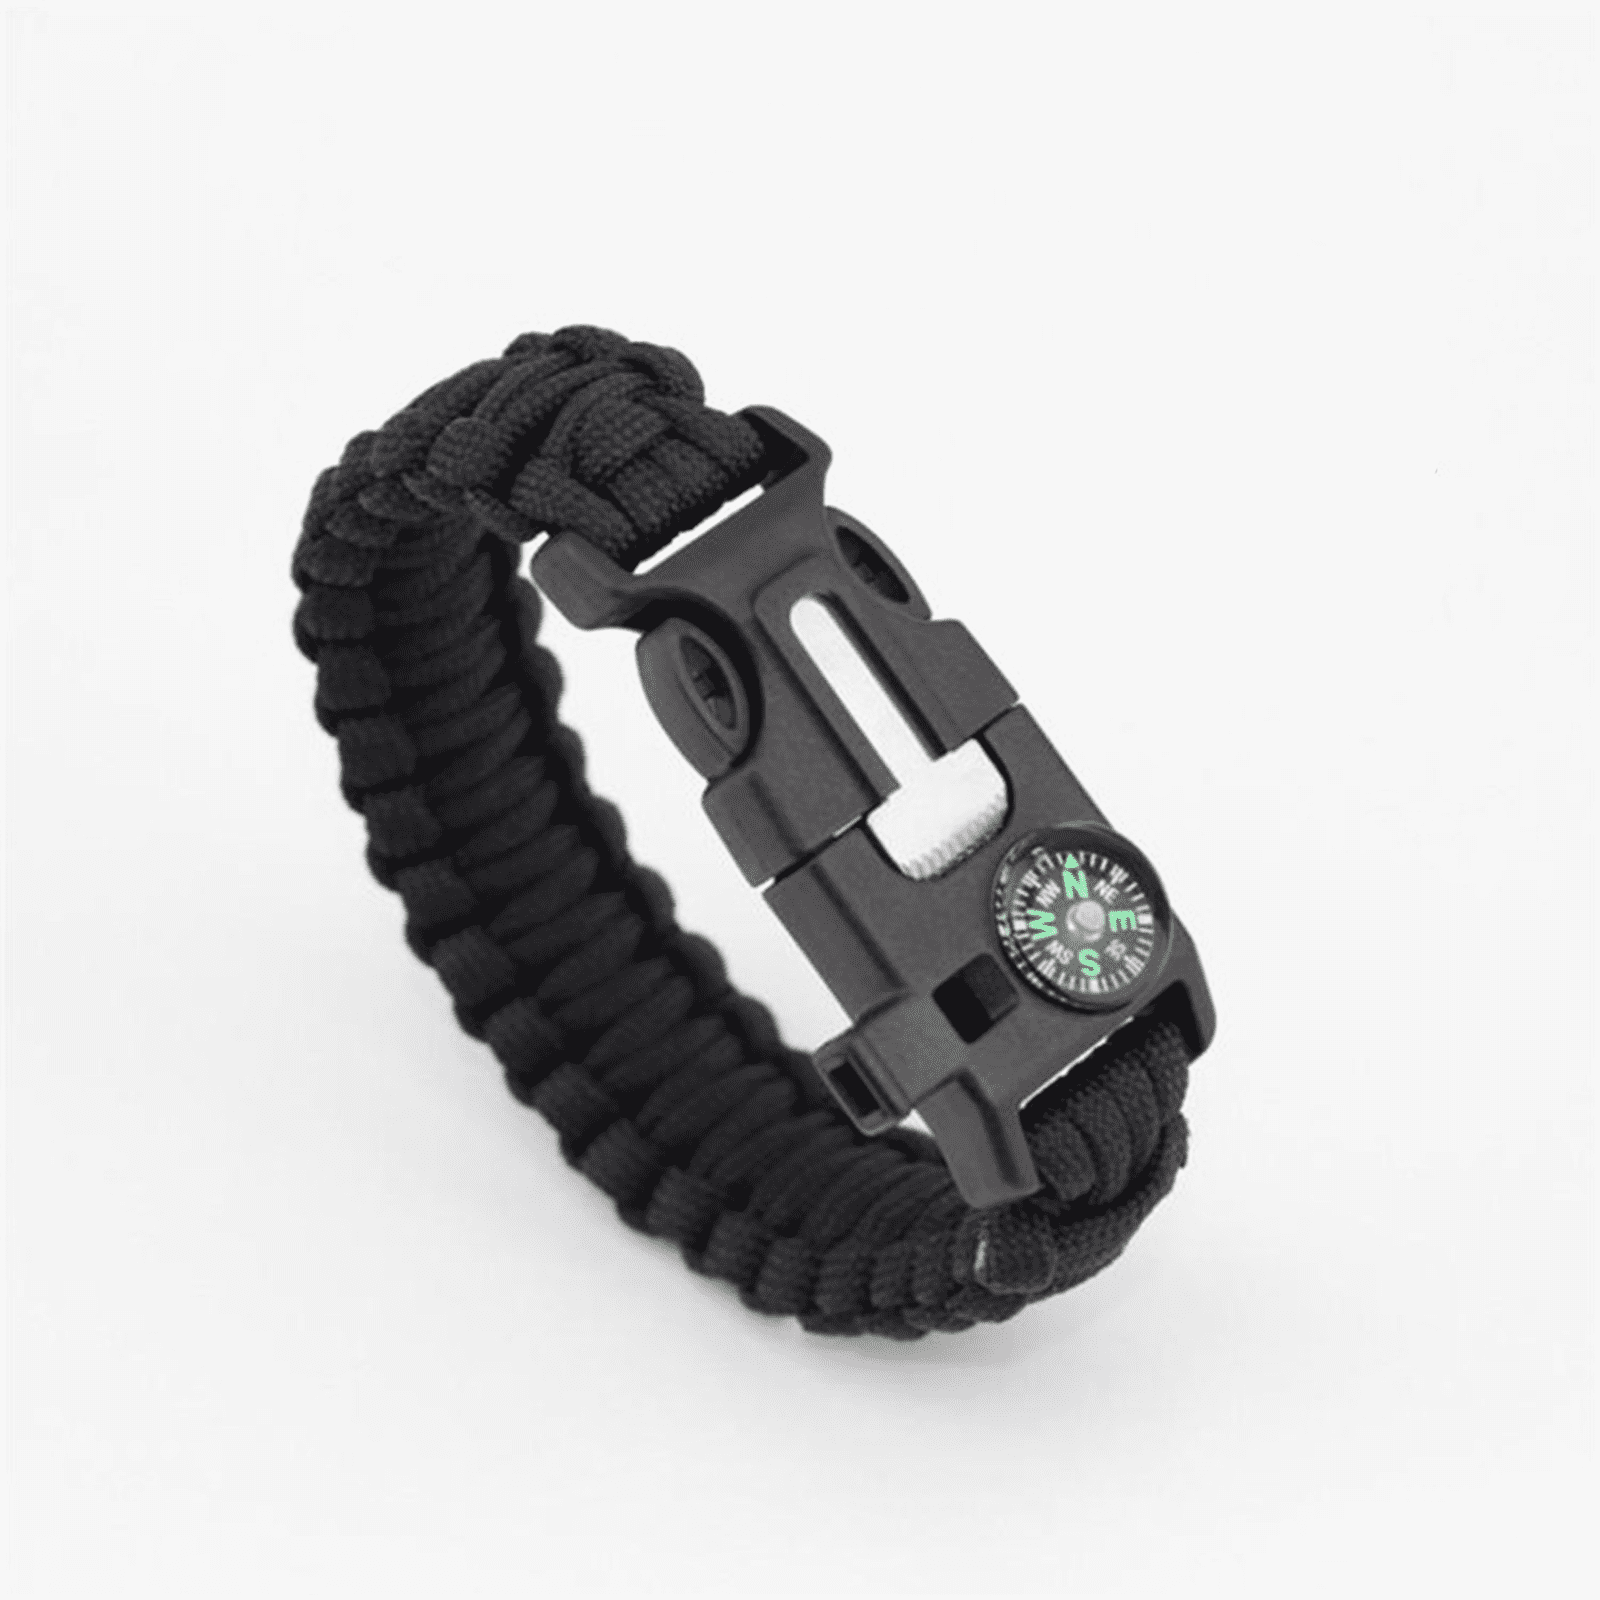 3/8" Flint Fire Starter Compass Whistle Buckle Emergency Survival Paracord 11mm 